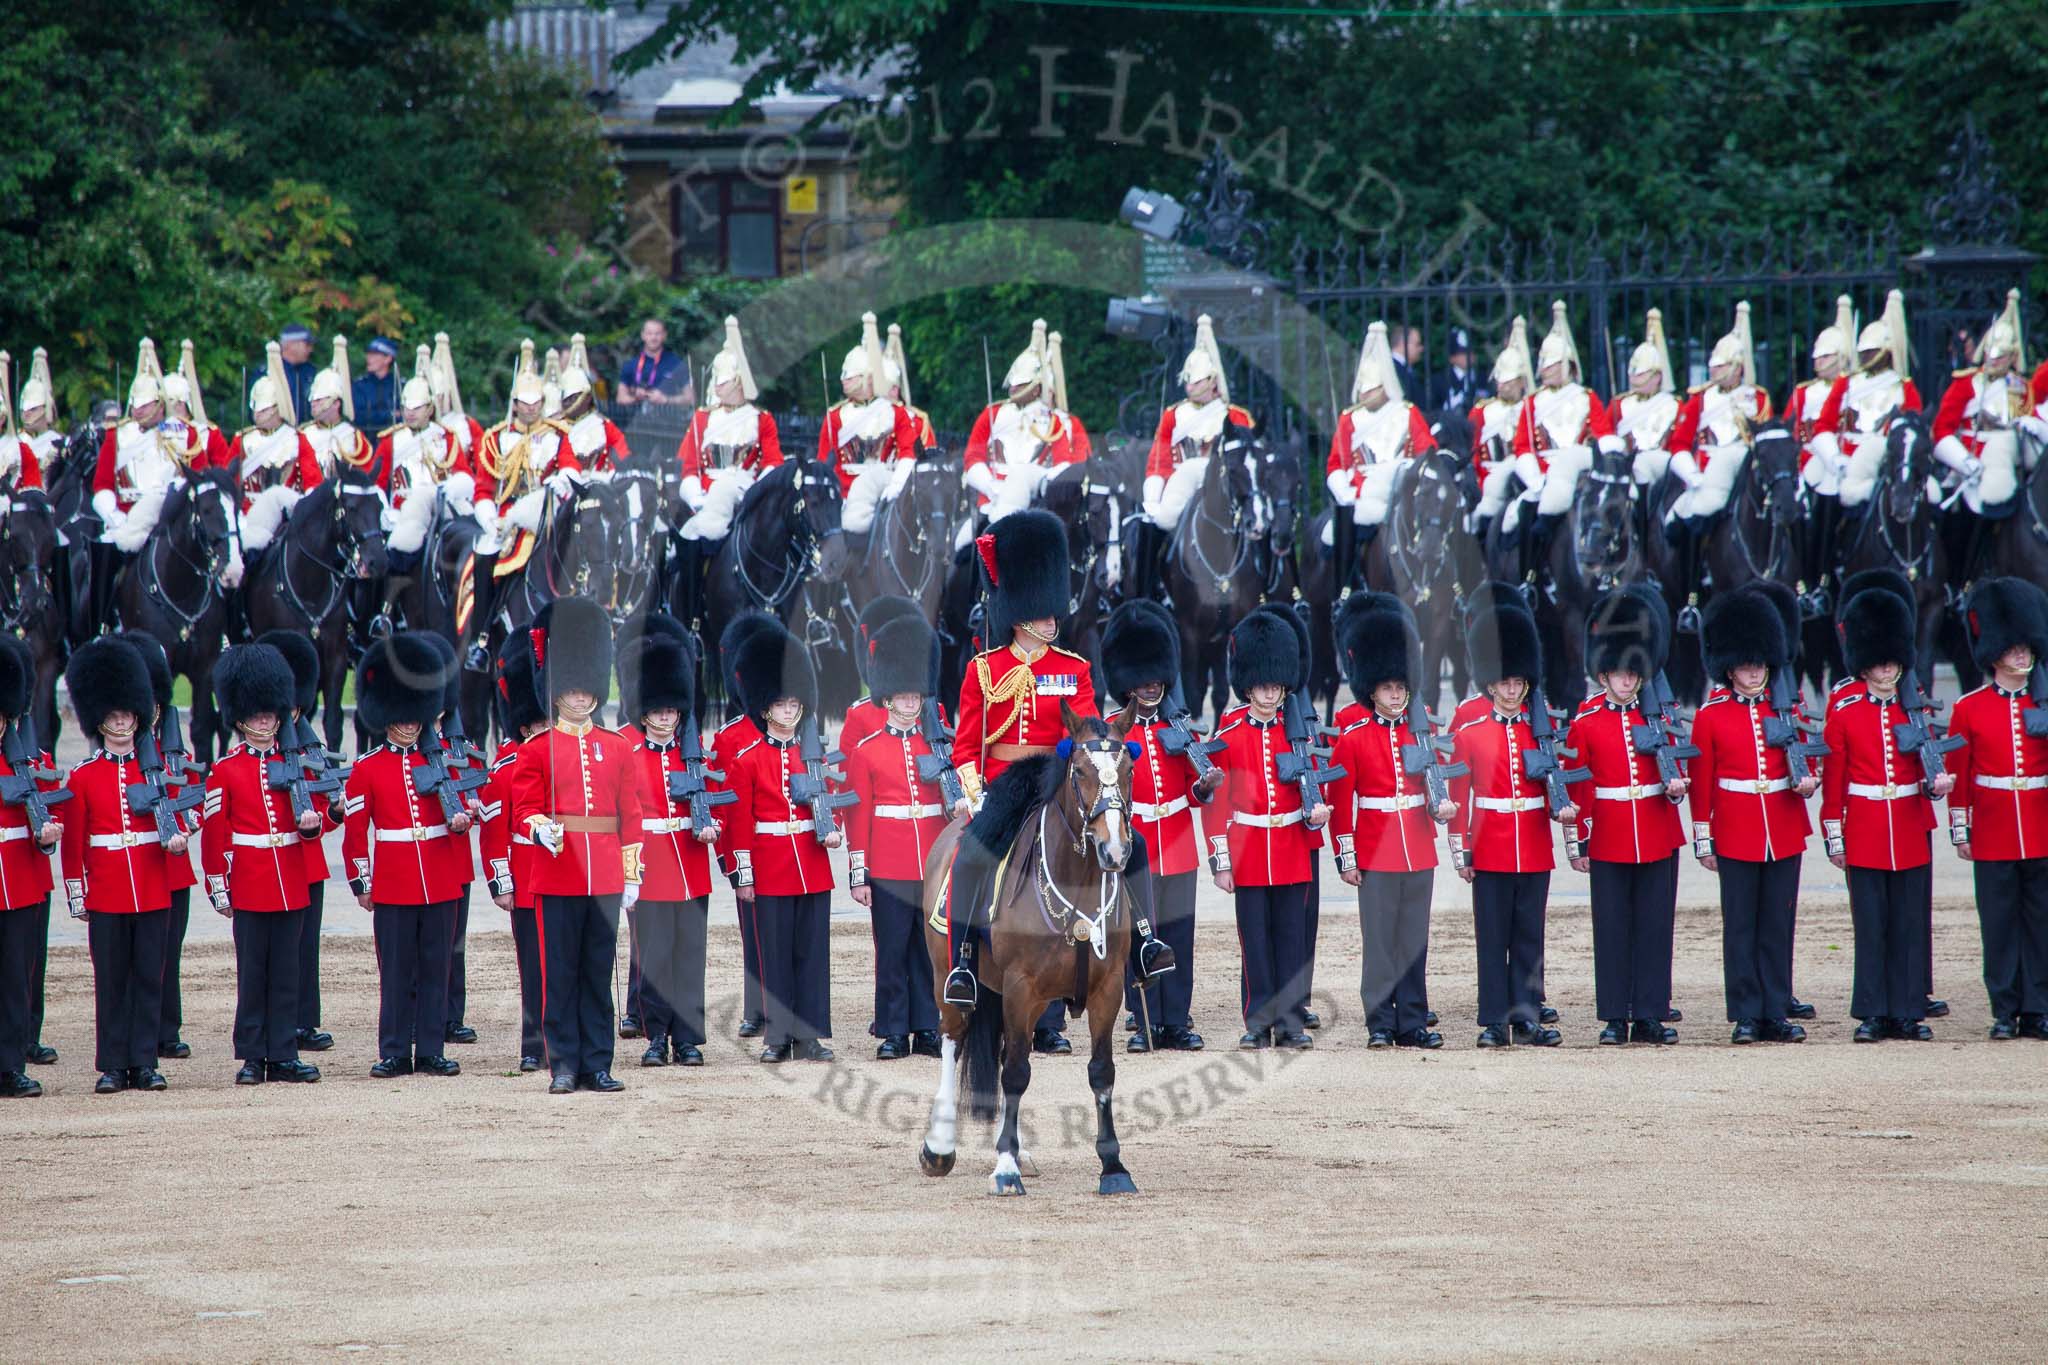 Trooping the Colour 2012: The Field Officer in Brigade Waiting, Lieutenant Colonel R C N Sergeant, Coldstream Guards, in front of No. 3 Guard, No. 7 Company, Coldstream Guards. Behind them troopers from The Life Guards..
Horse Guards Parade, Westminster,
London SW1,

United Kingdom,
on 16 June 2012 at 12:02, image #608